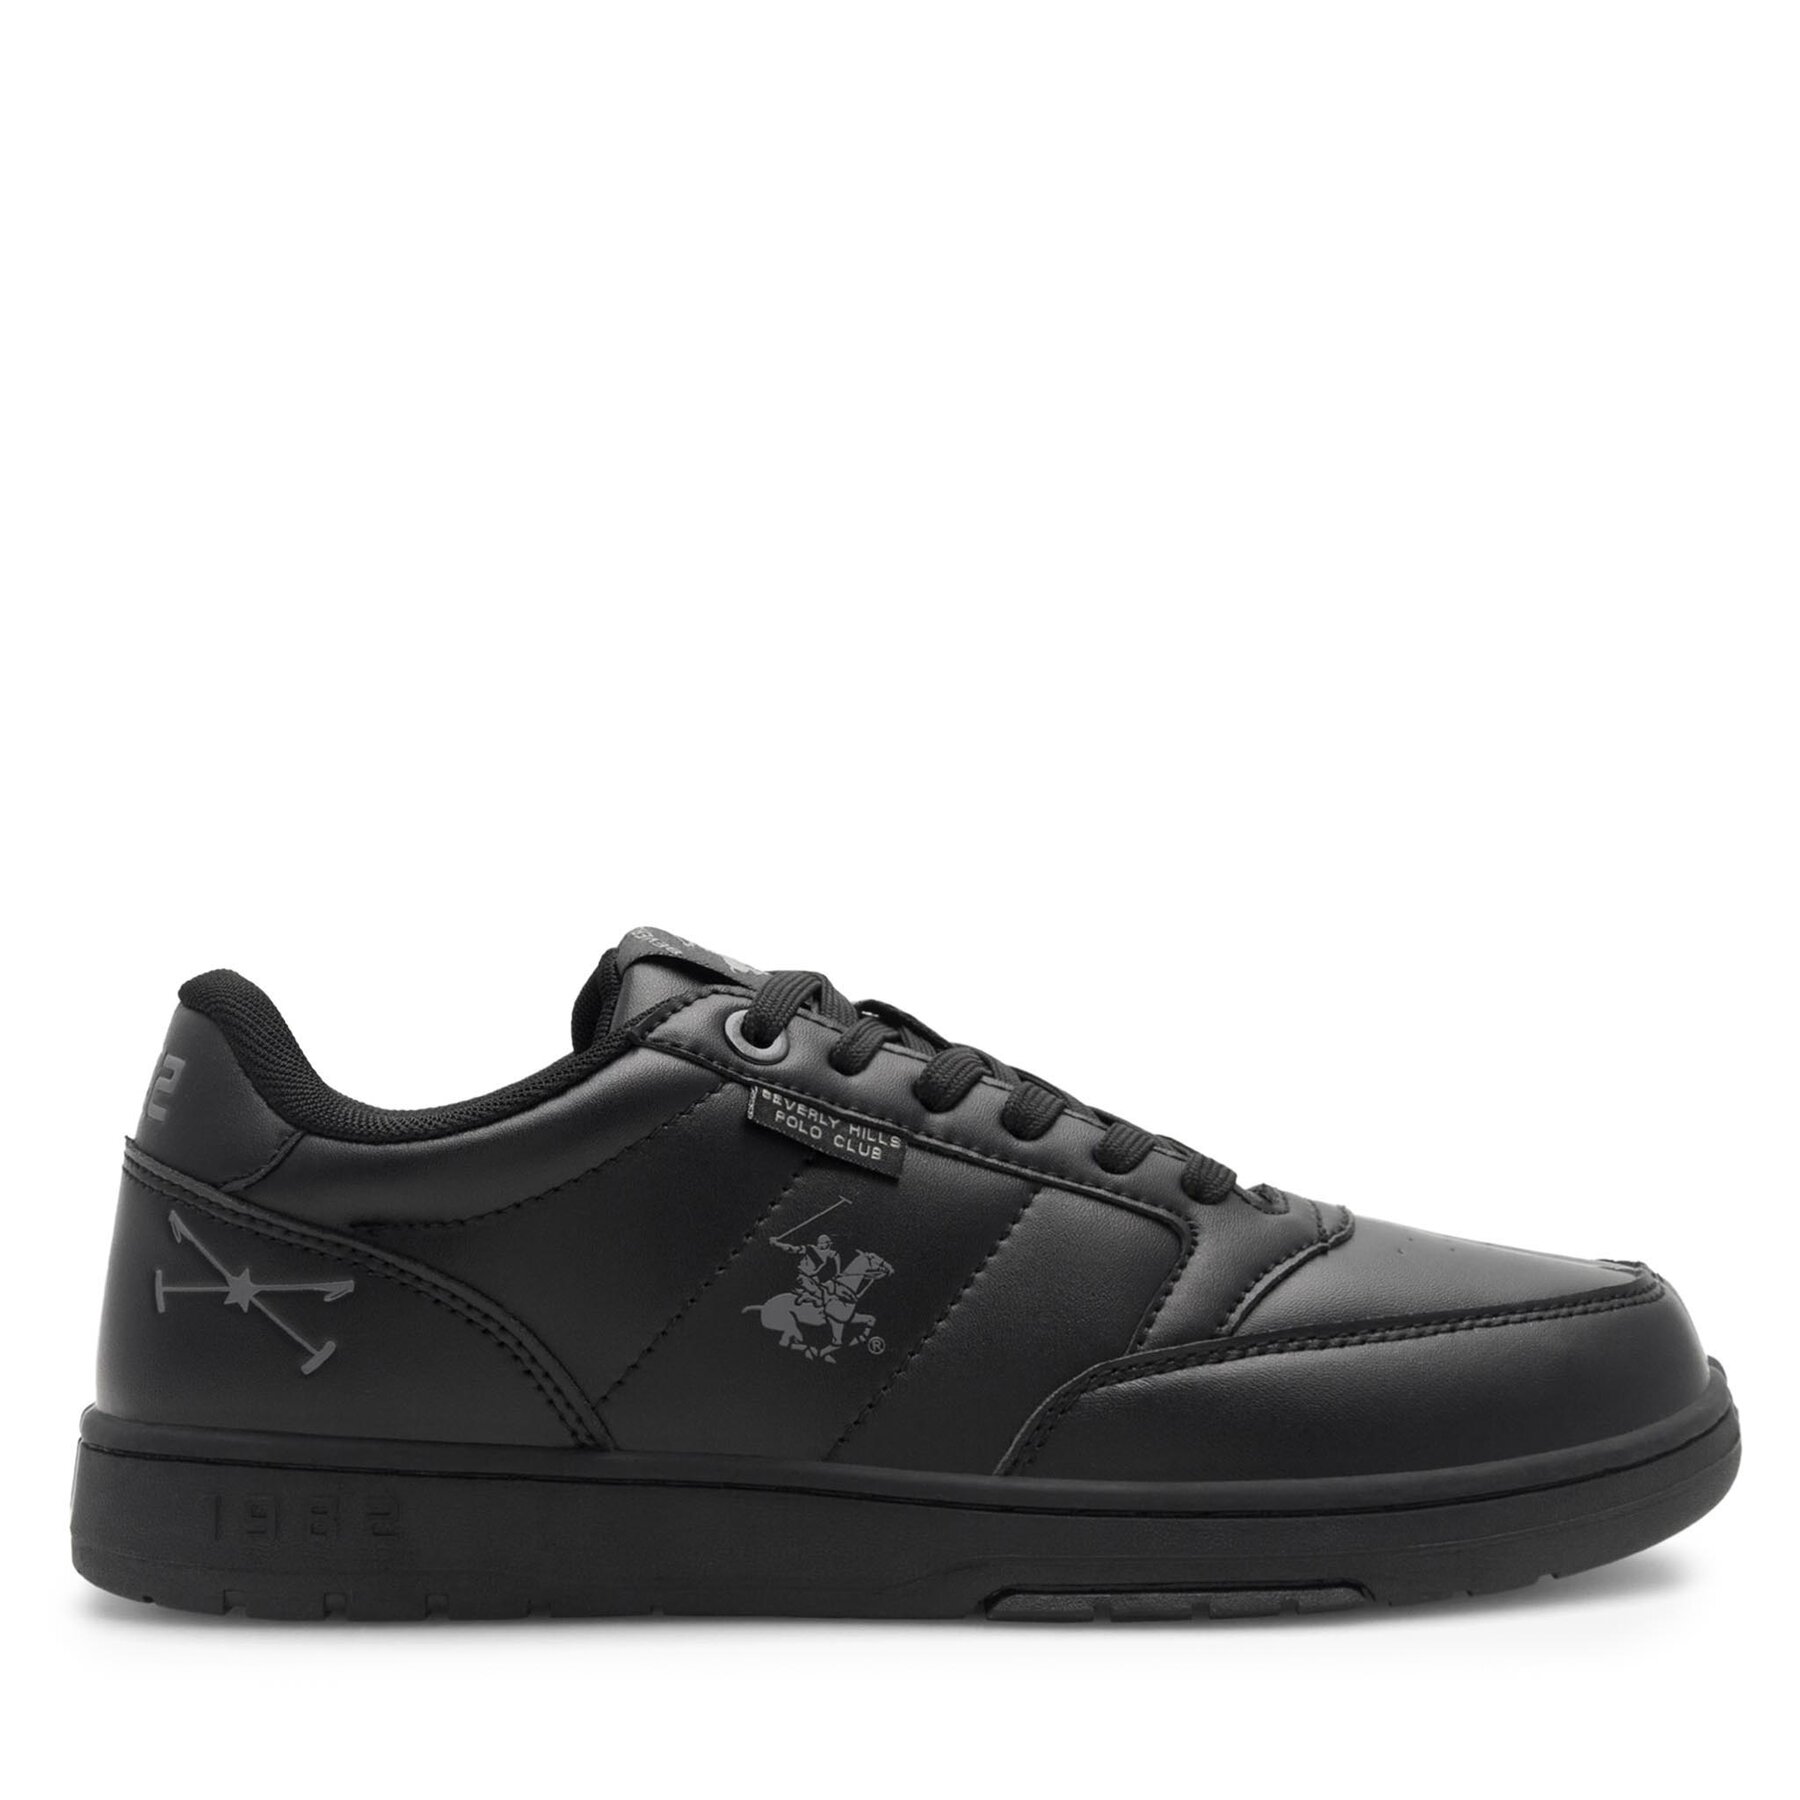 Sneakers Beverly Hills Polo Club HIP-01 Schwarz von Beverly Hills Polo Club